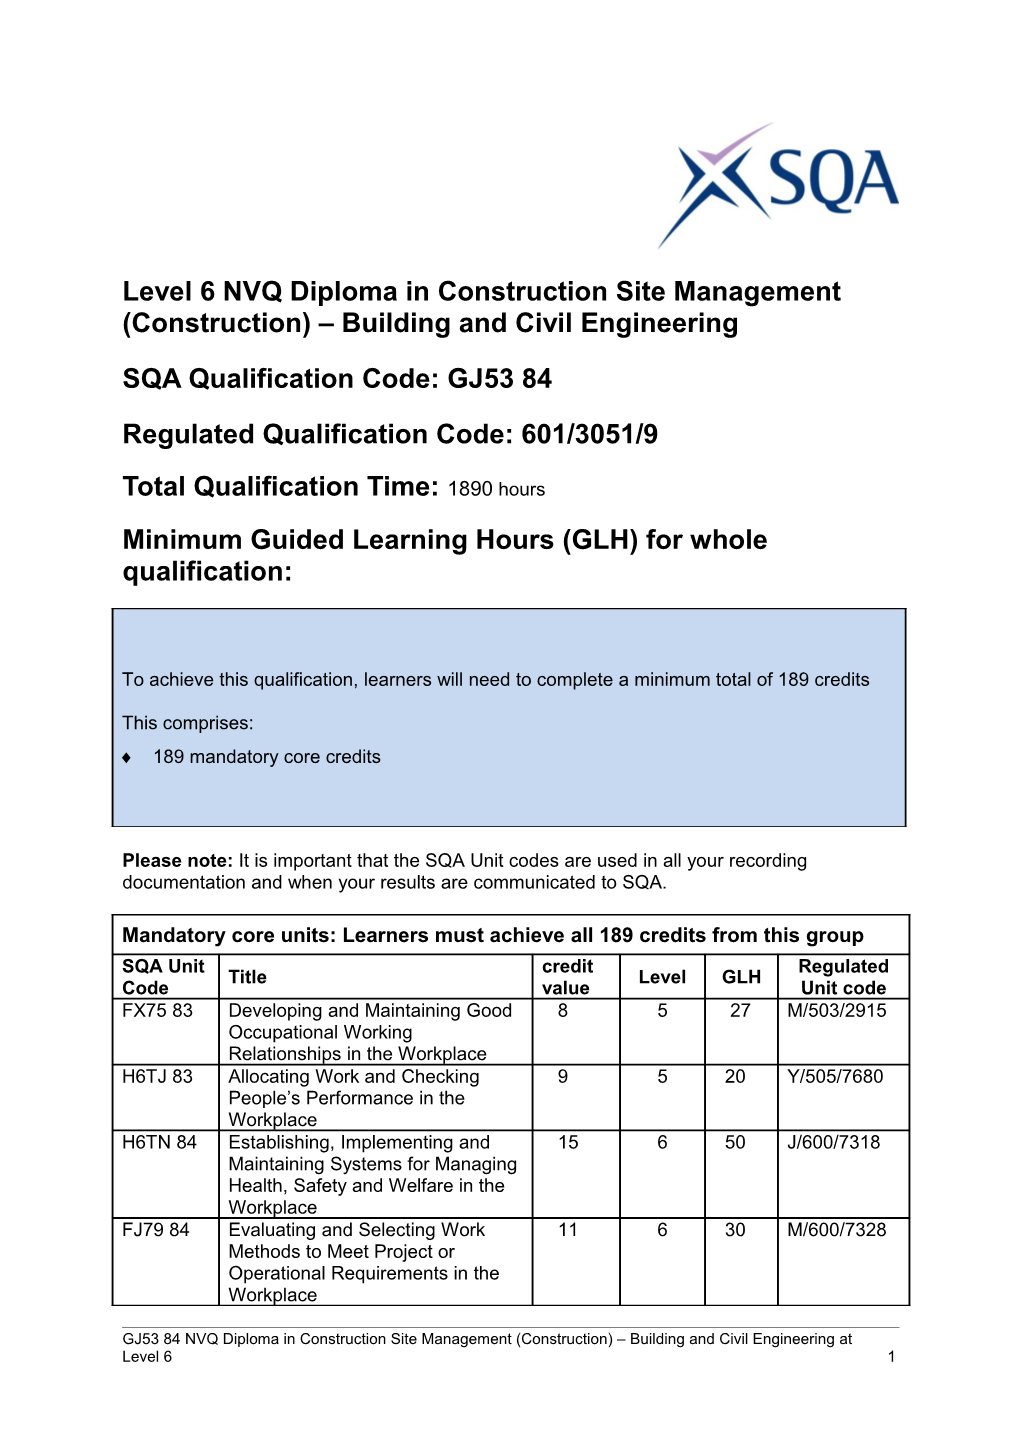 Level 6NVQ Diploma in Construction Site Management(Construction) Building and Civil Engineering